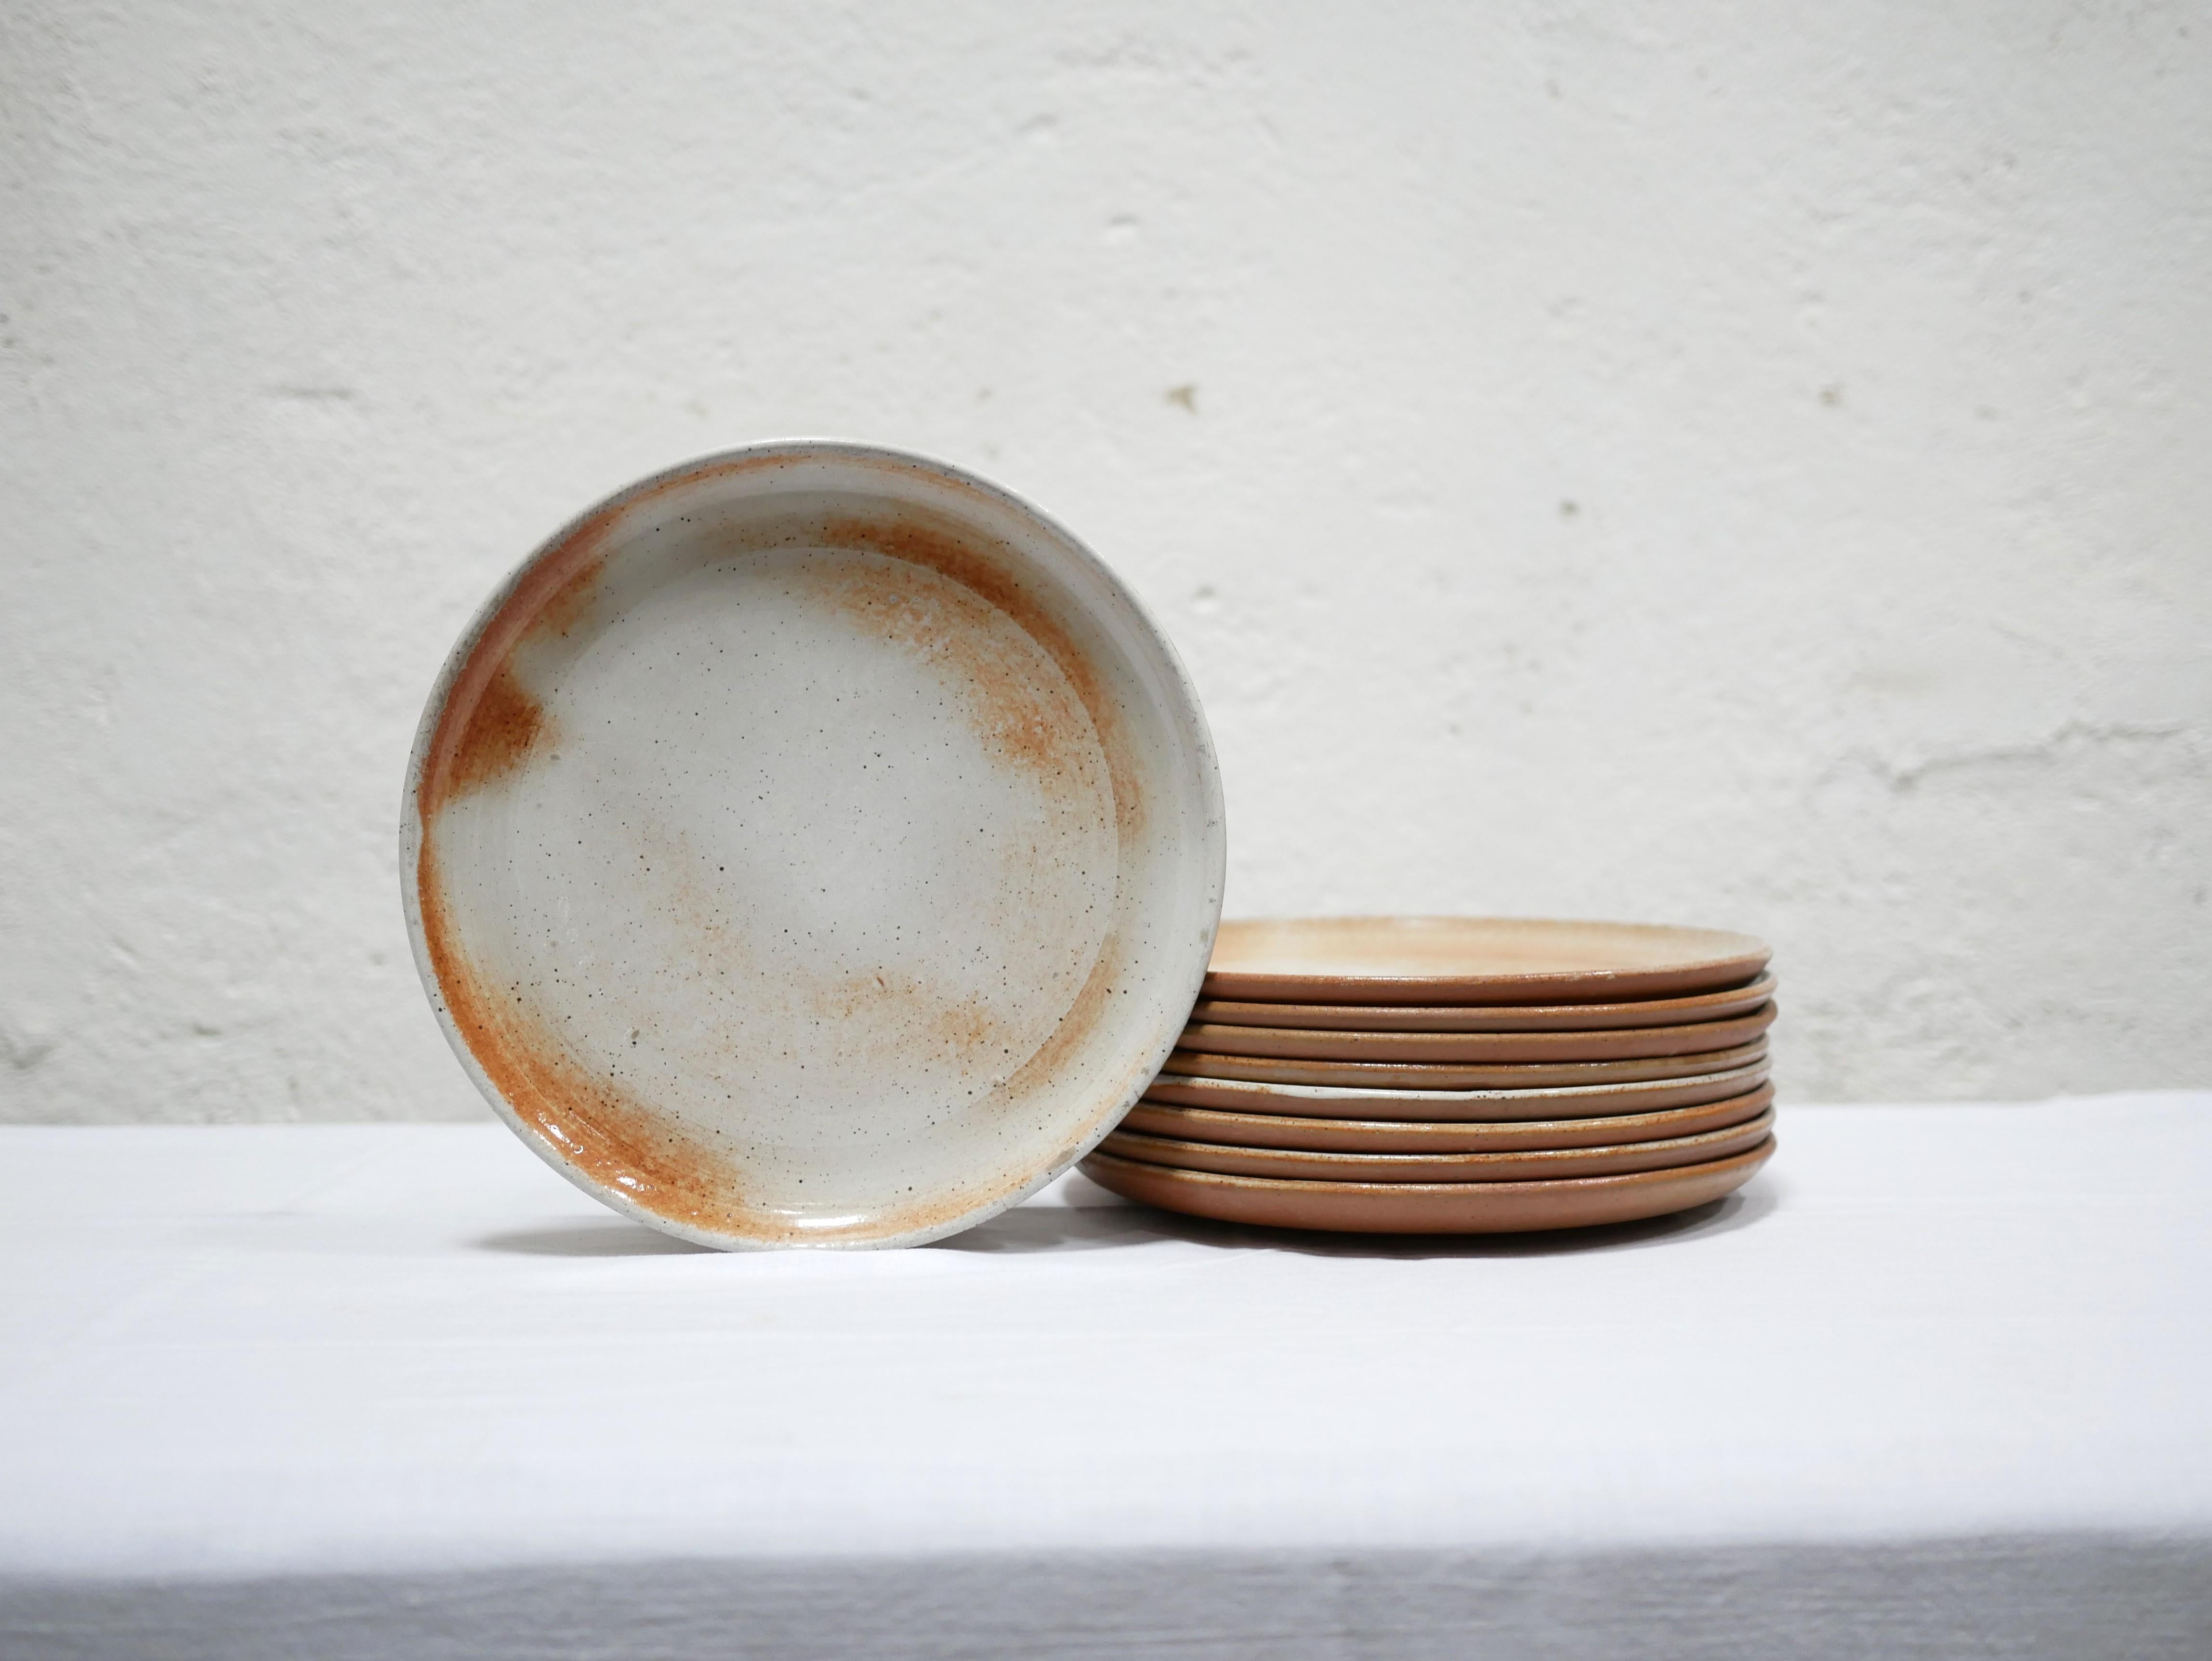 Series of 9 vintage stoneware plates by the Poteries du Marais, France 1